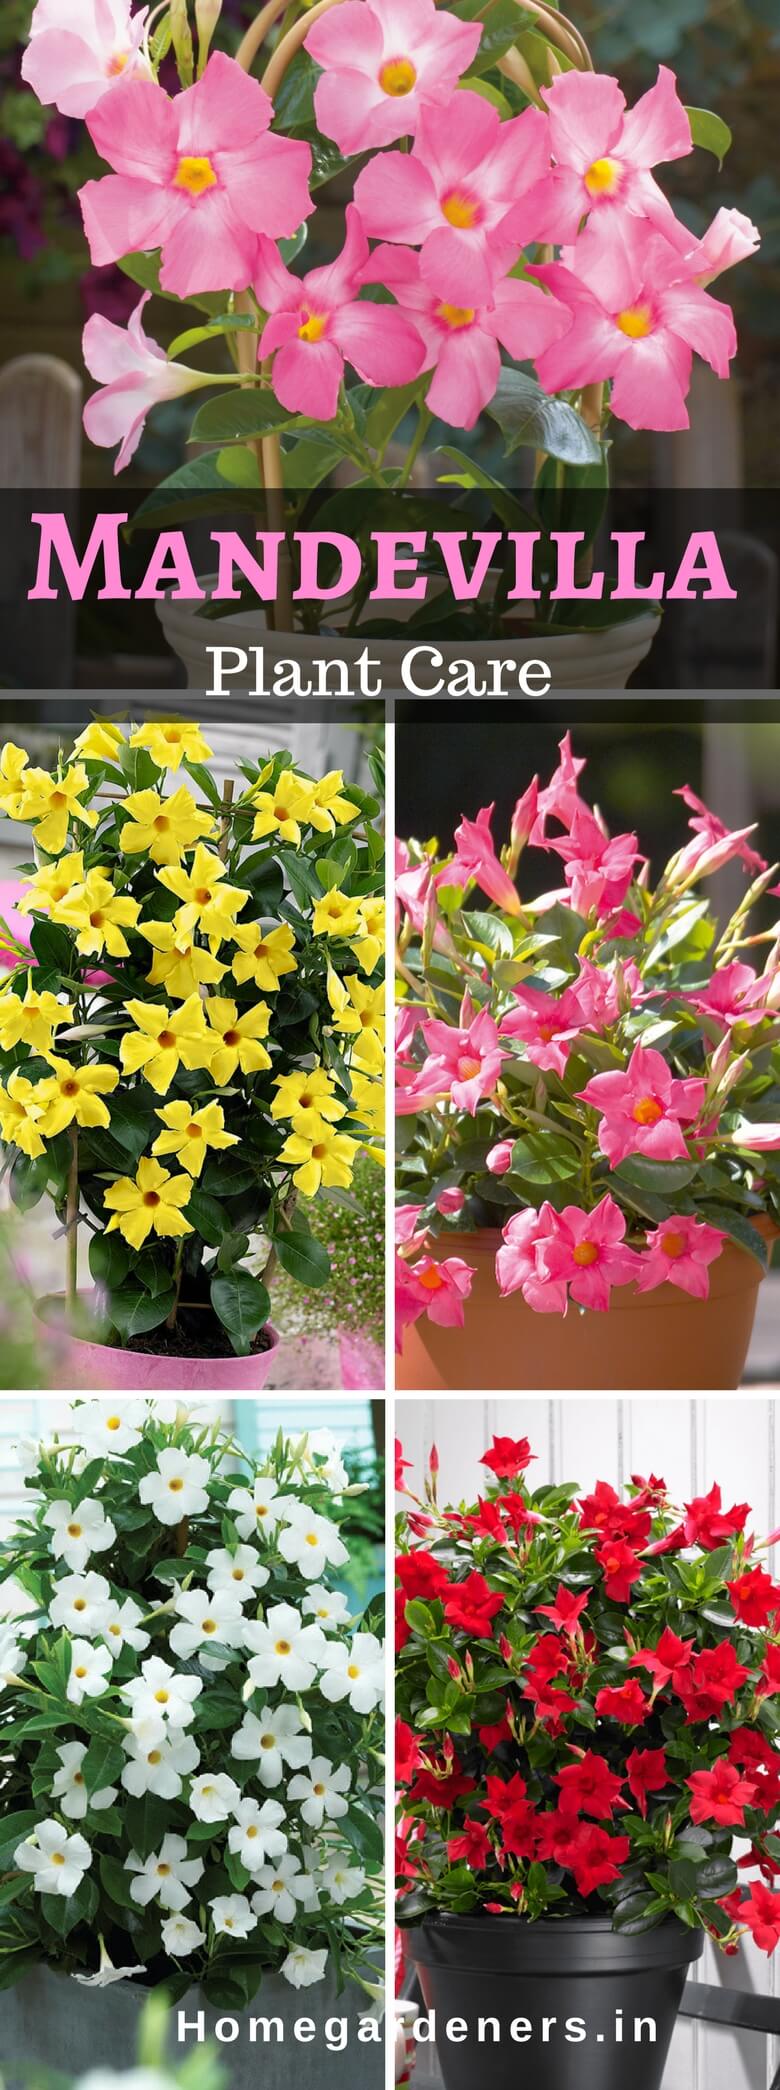 Rock trumpet plant - How to Care Mandevilla Vine plant in your Home and Garden